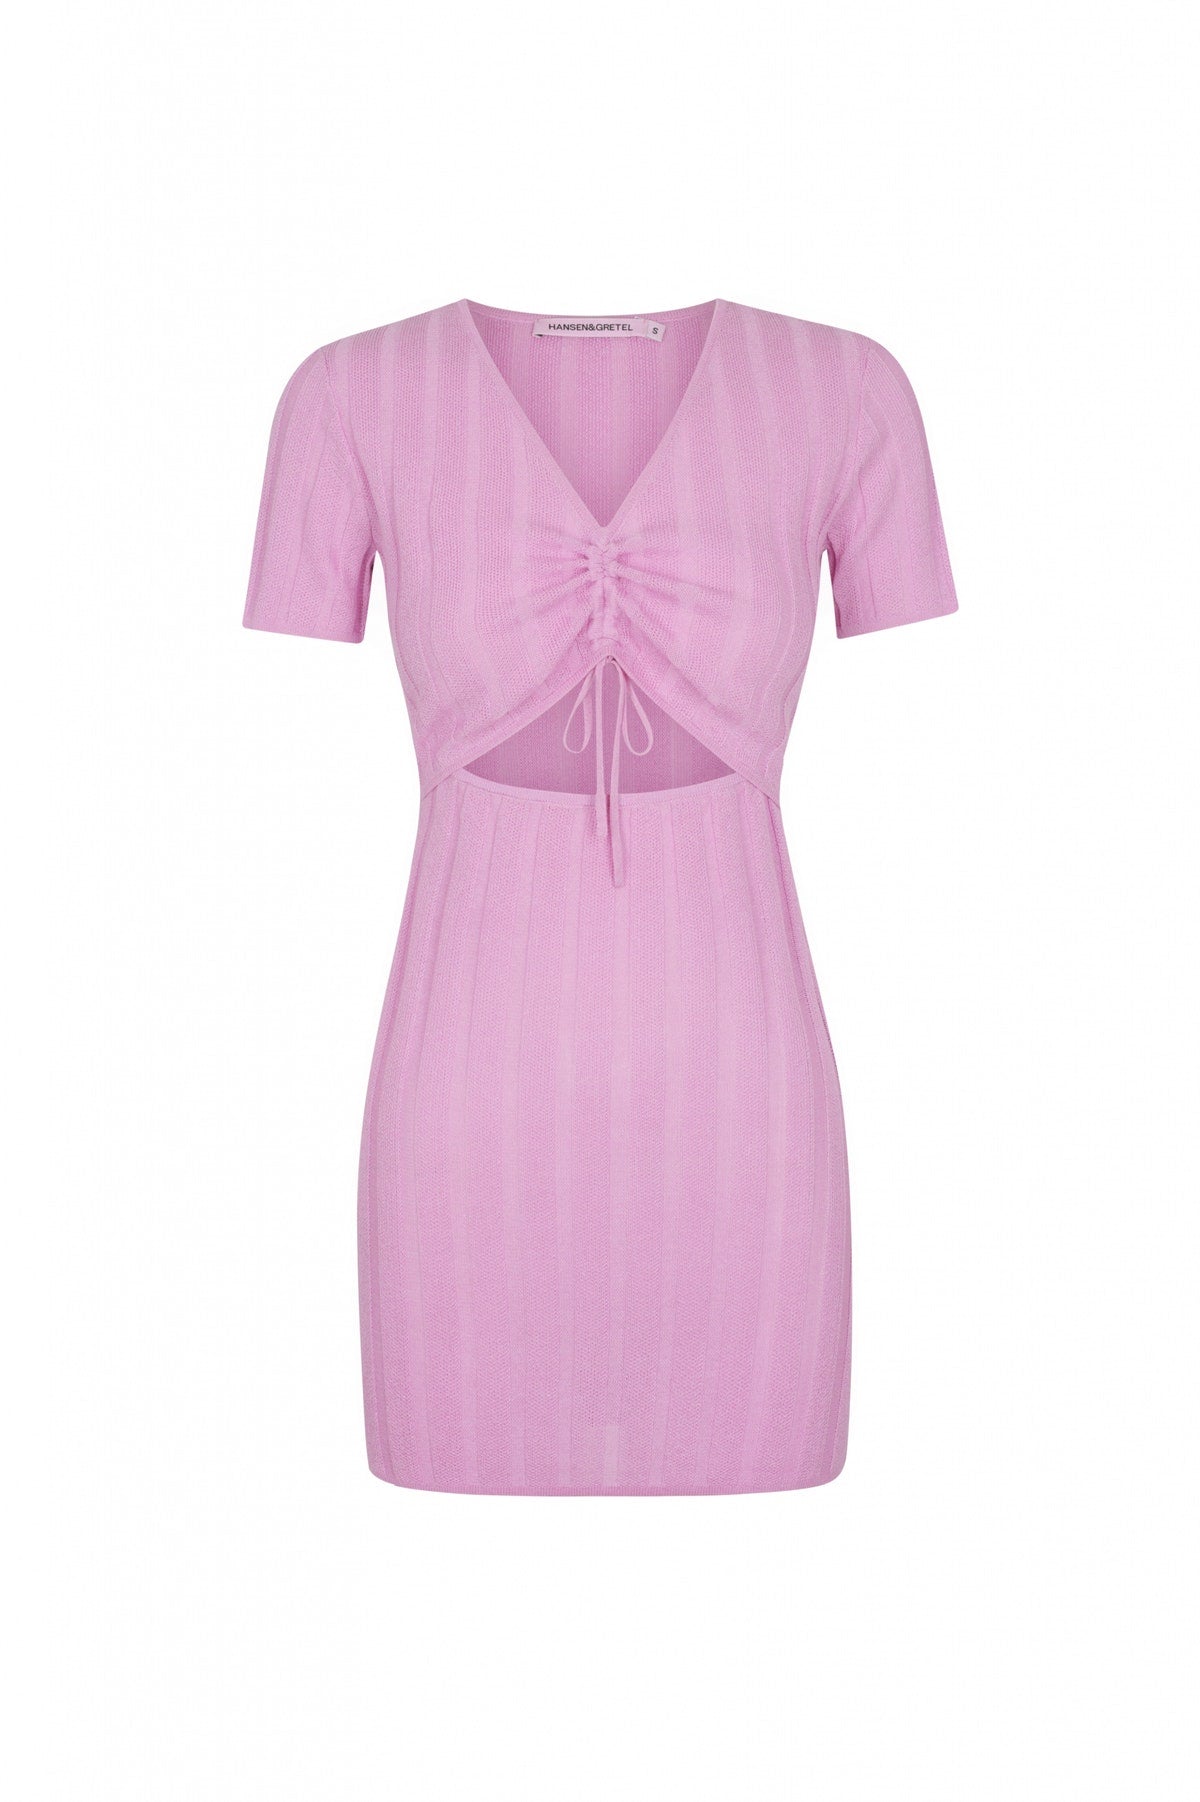 Gianni Dress in Orchid